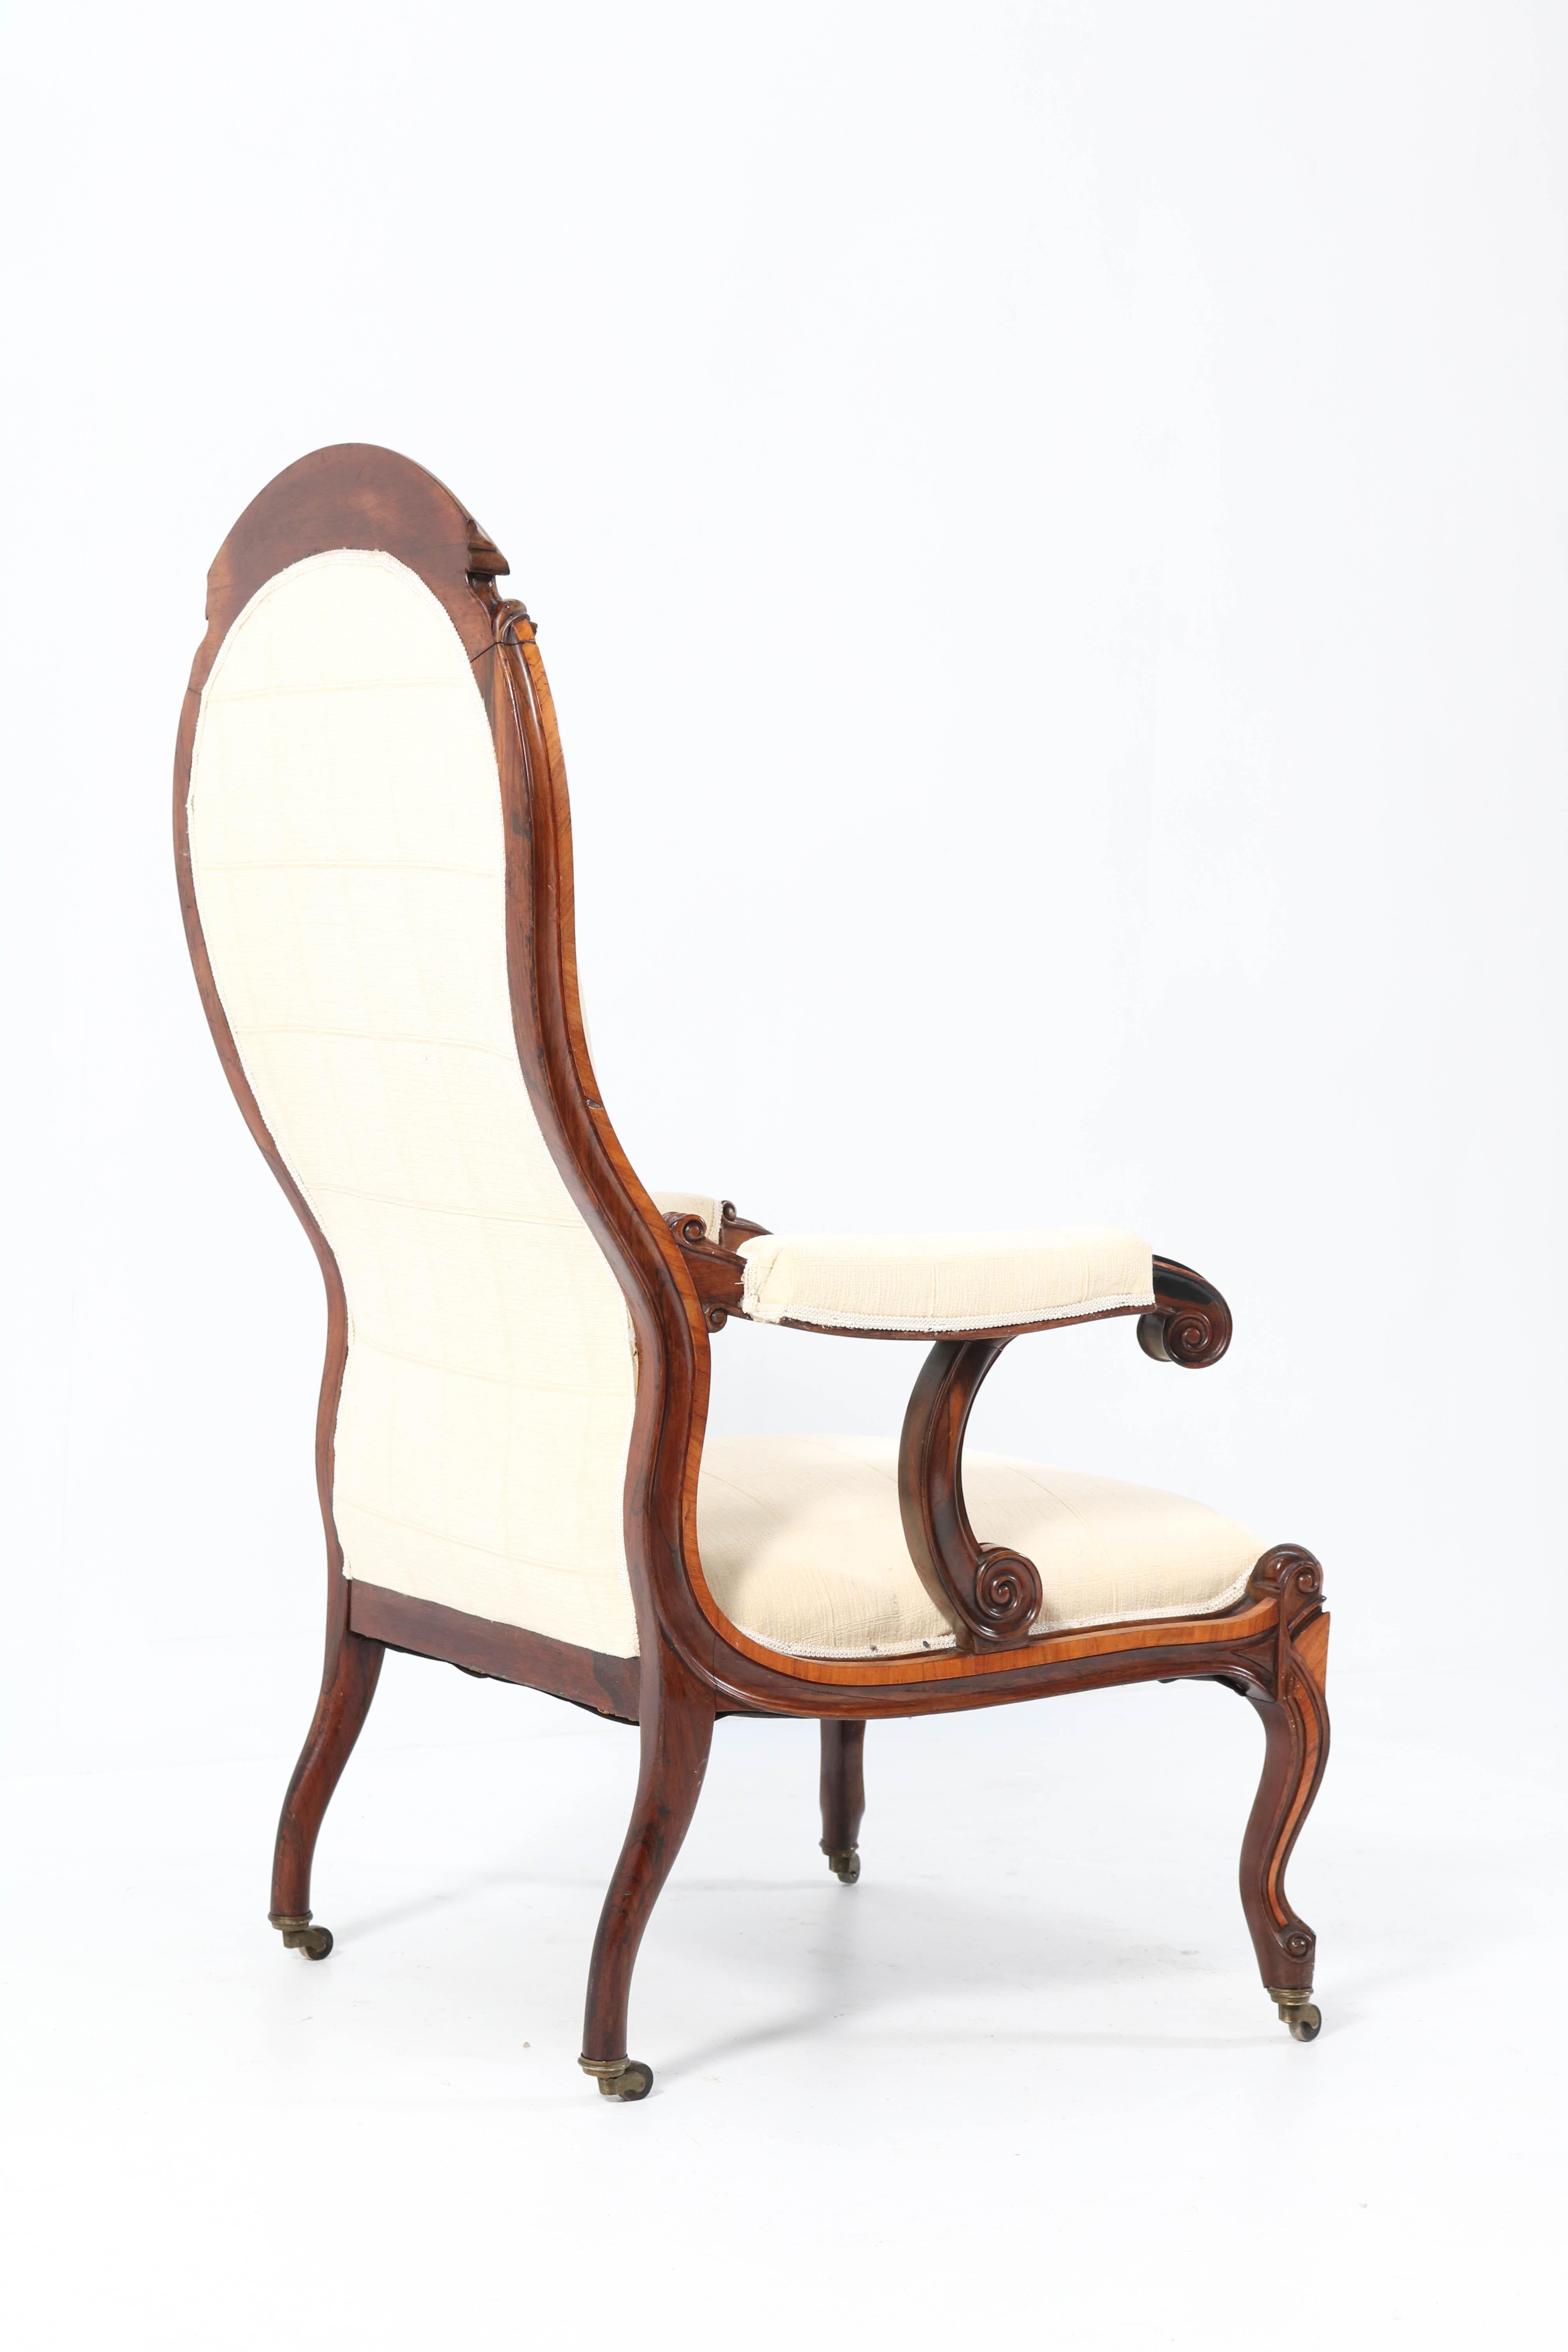 Satinwood Victorian High Back Armchair or Voltaire Chair, 1860s For Sale 9